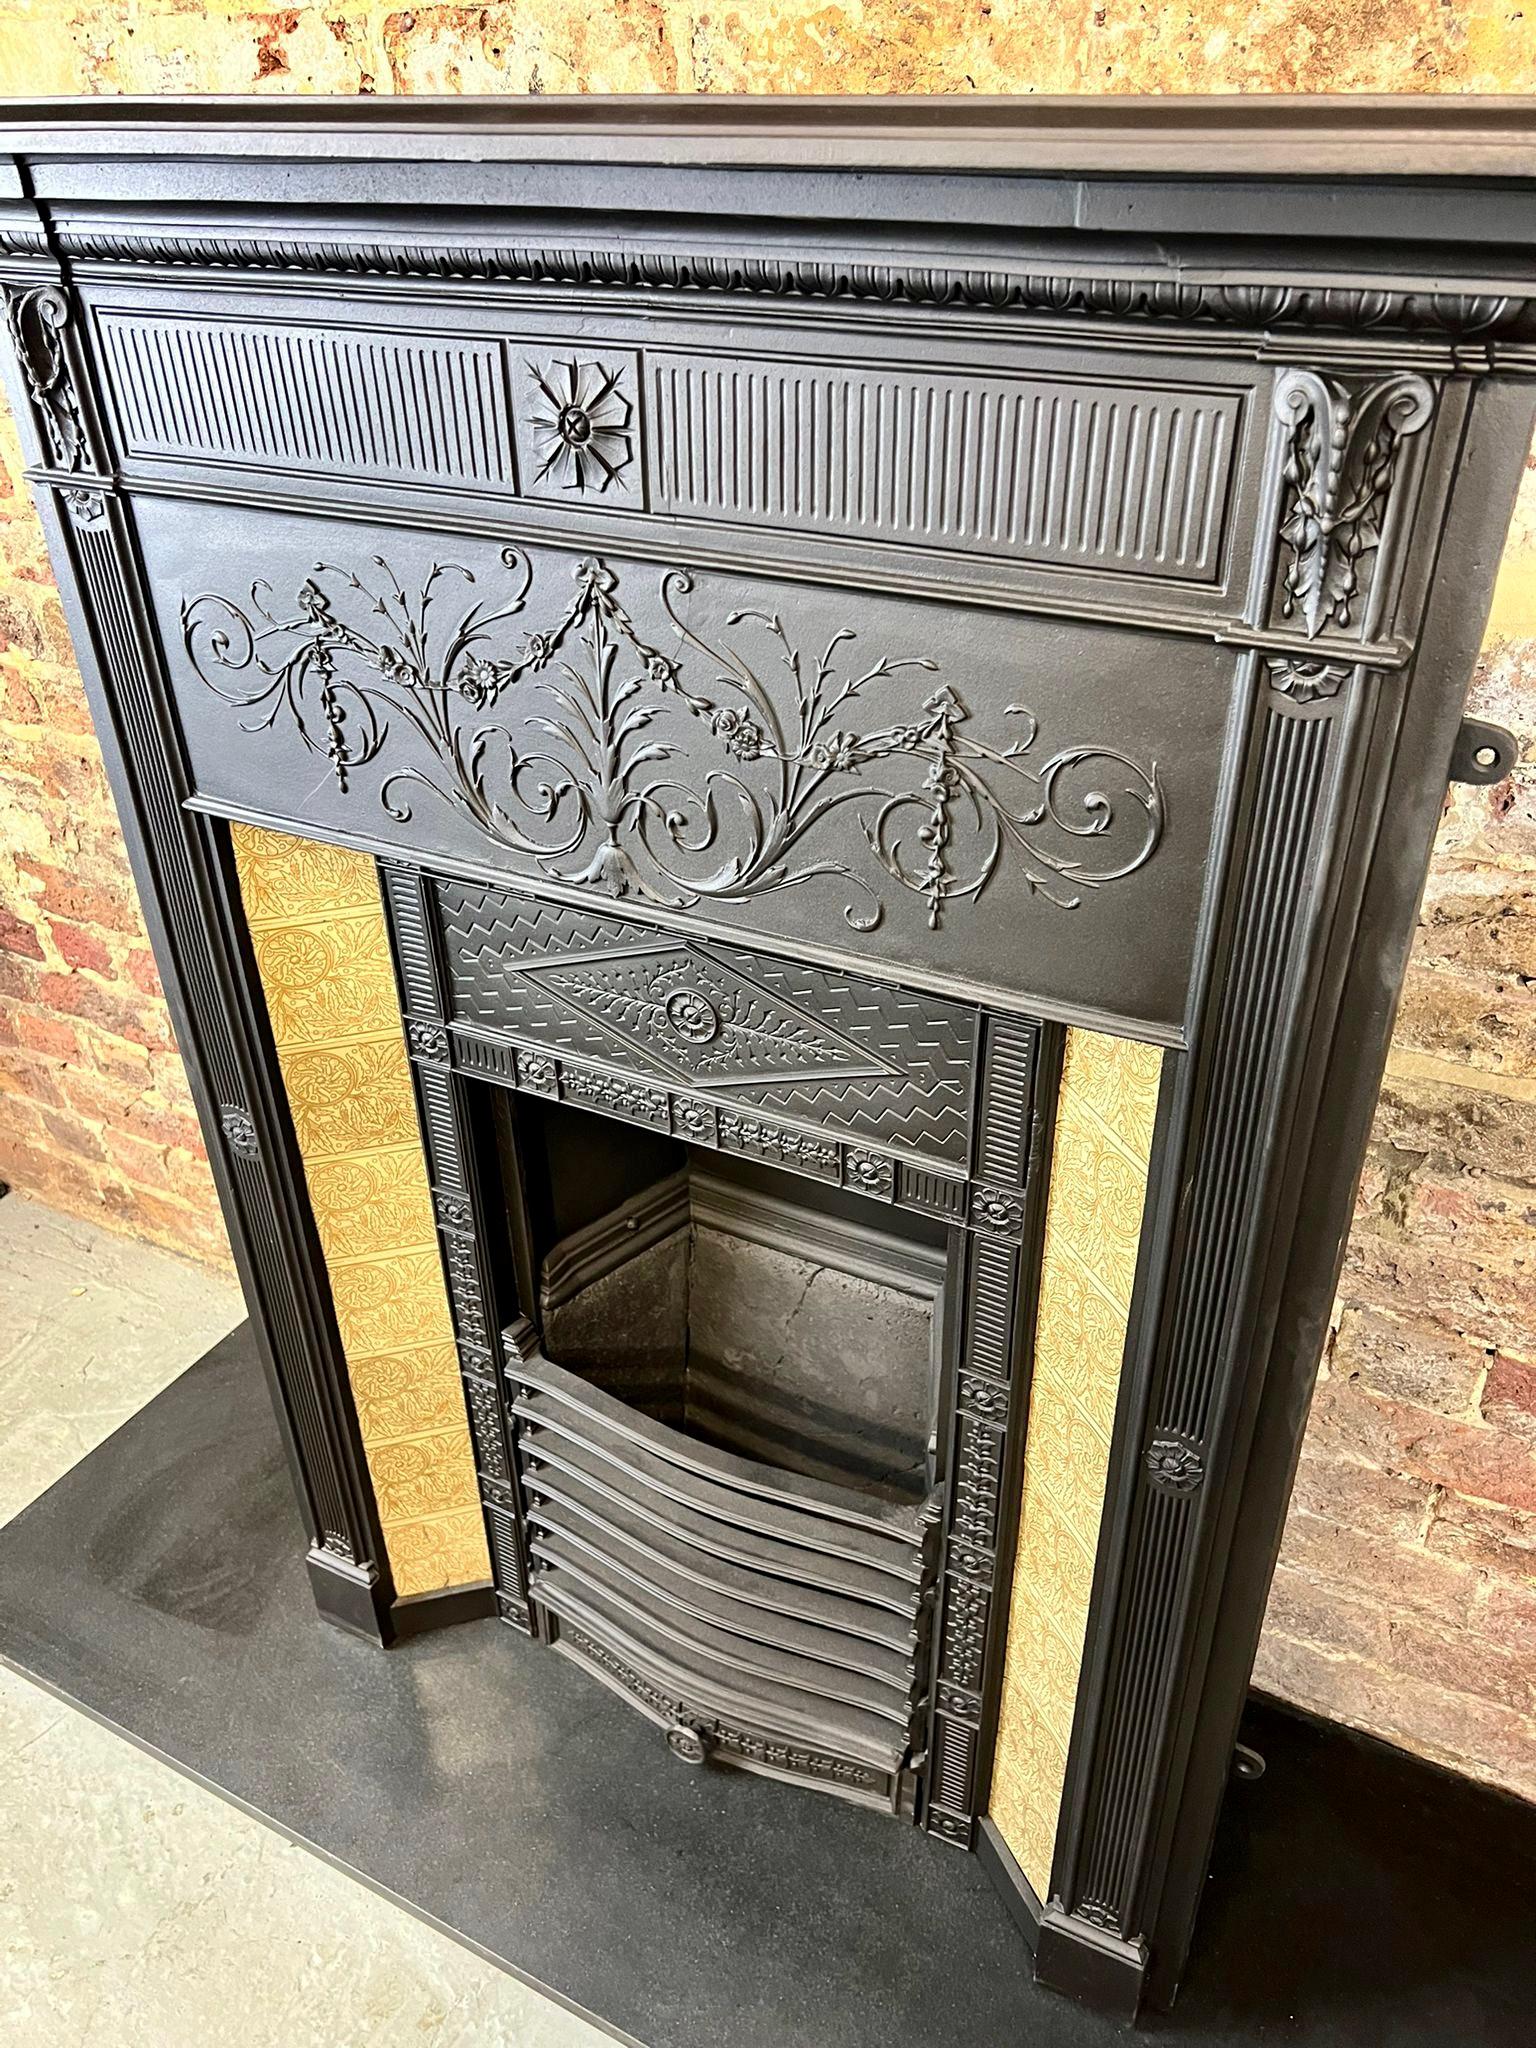 19th Century late Georgian - early Victorian cast-iron tiled combination fireplace.
This antique original fireplace has been recently salvaged from a large london town house, blackened to its original finish. Notably suitable for a smaller chimney